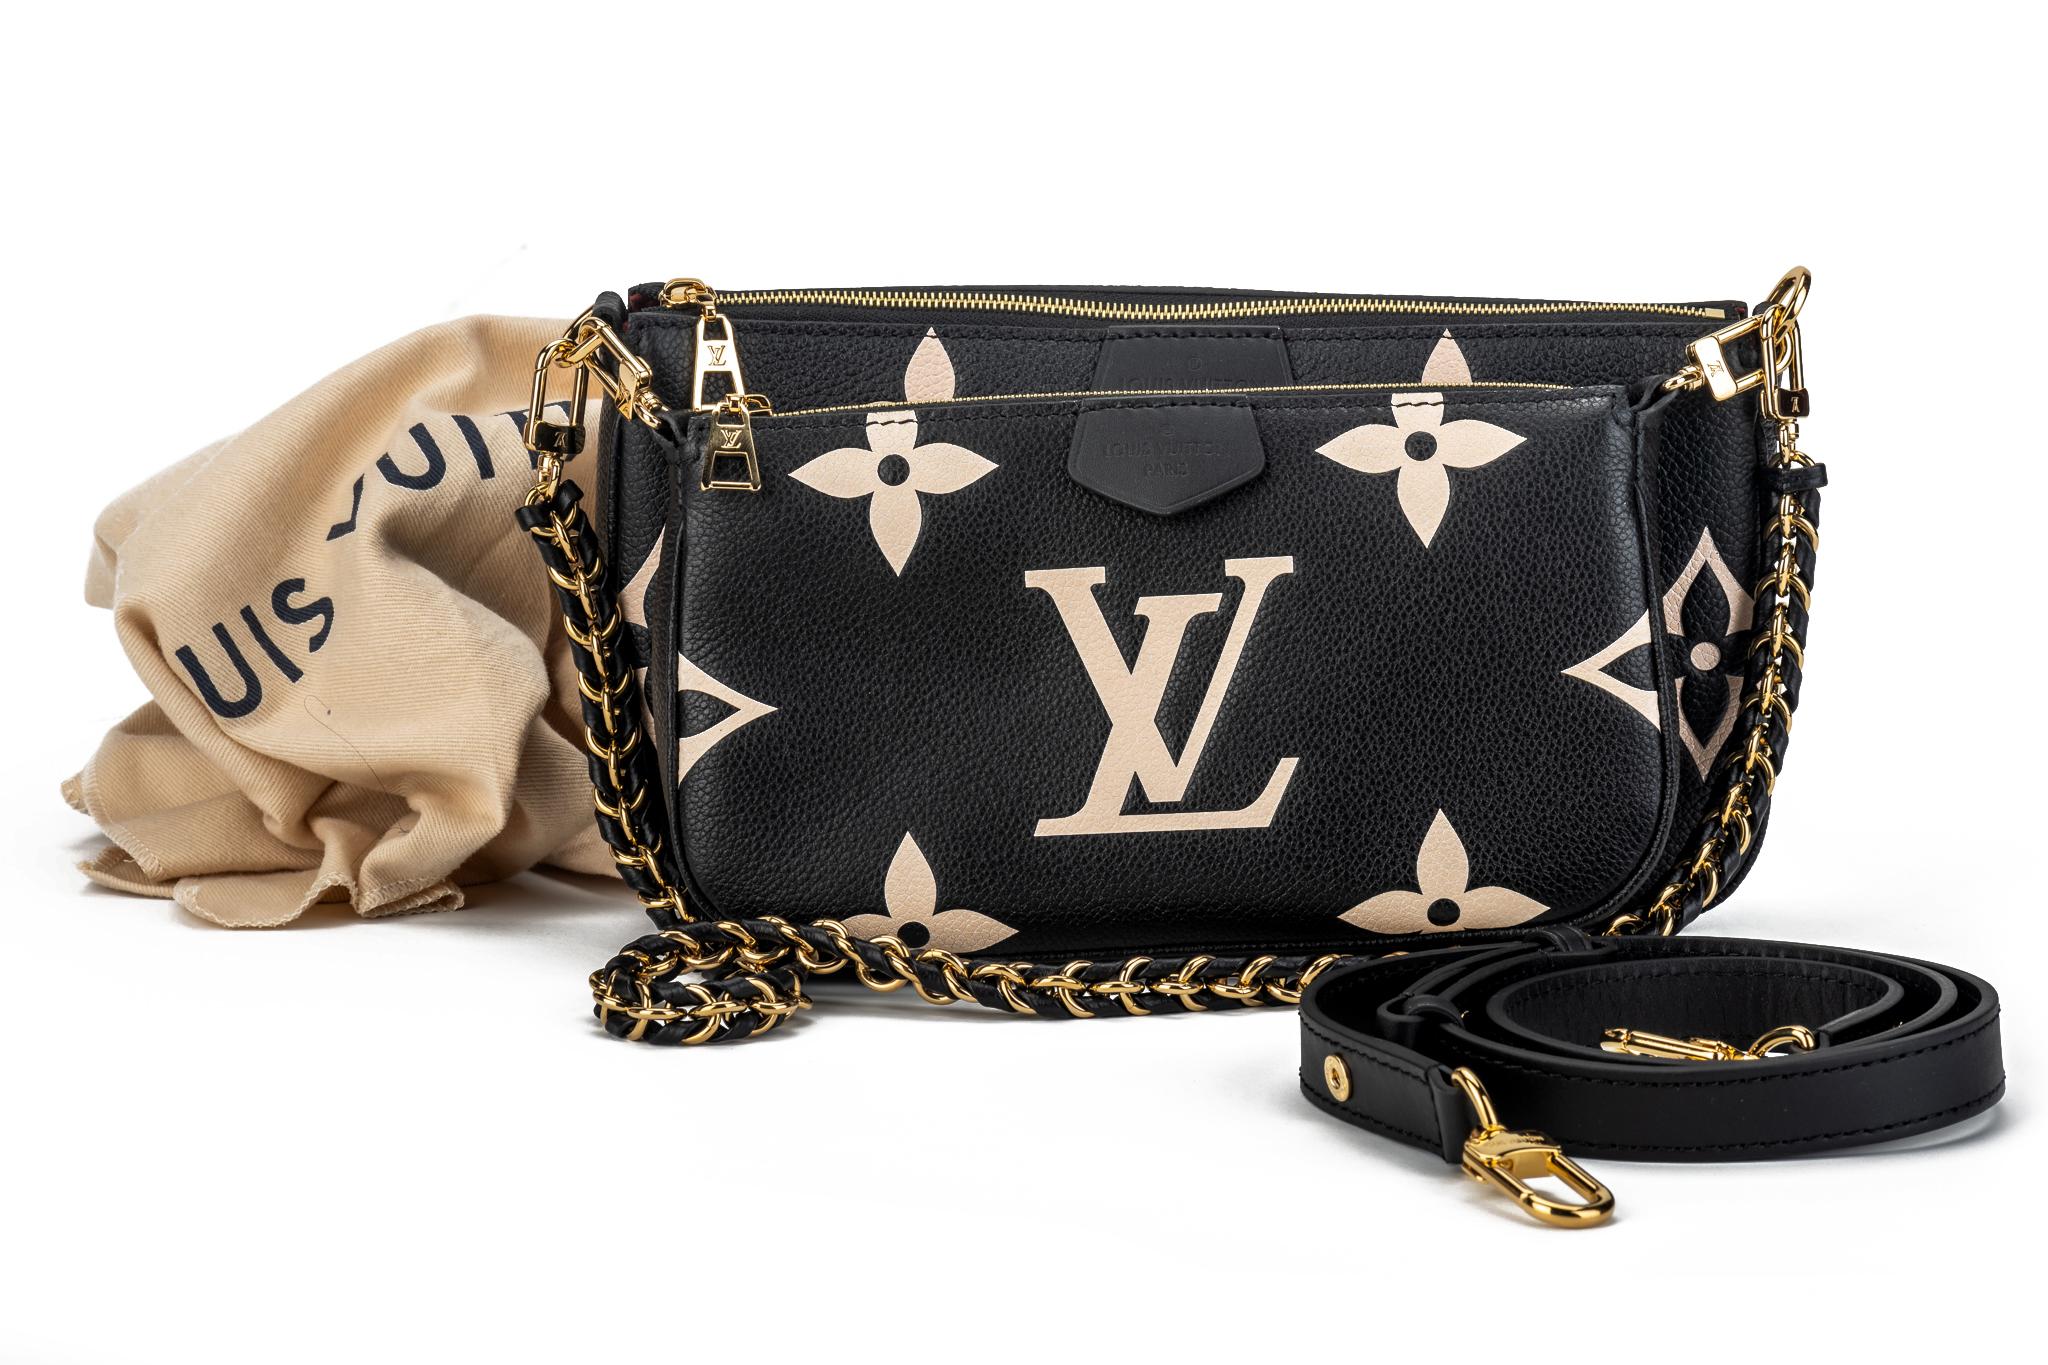 Louis Vuitton leather monogram embossed multi pochette, black with blush inserts with gold tone hardware. Can be worn three ways, separating the two bags and alternating the straps. Brand new with dust cover and original box.